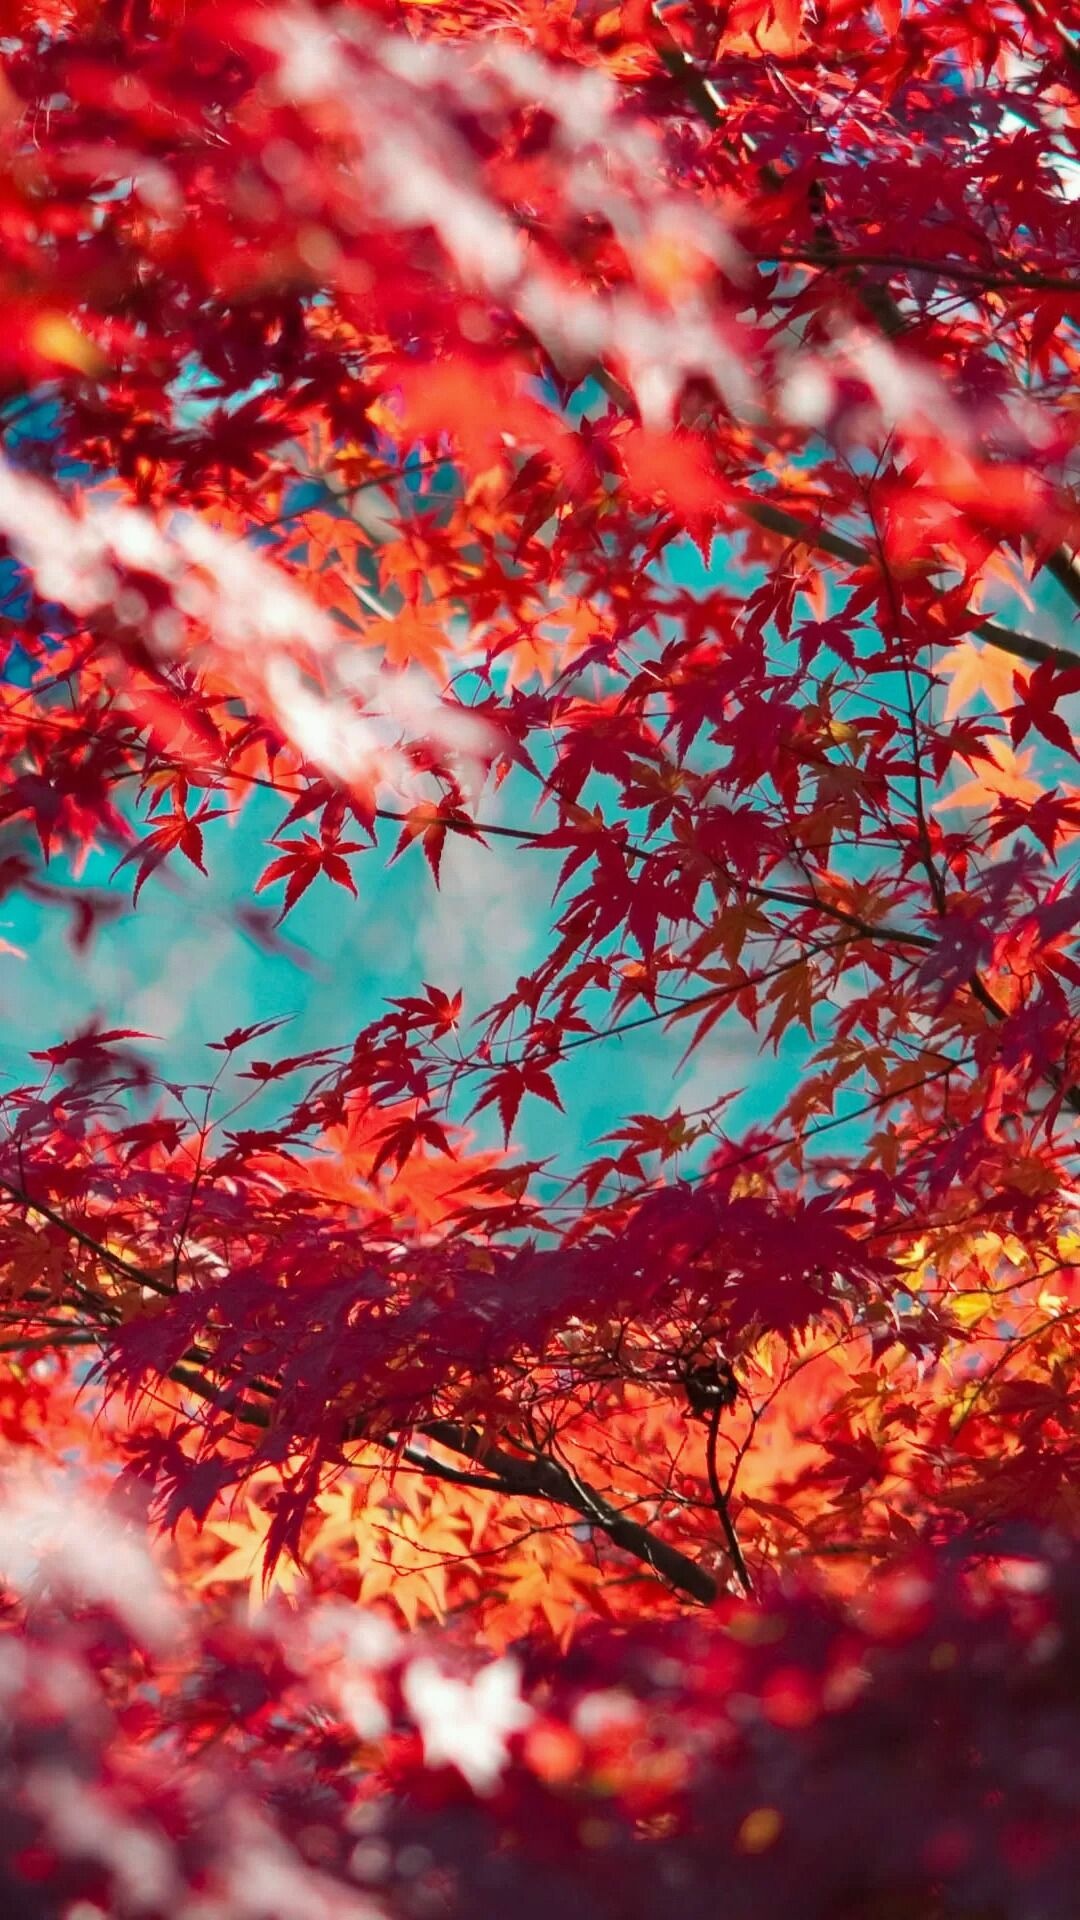 Red maple leaves, Tree wallpaper, Fall inspiration, iPhone background, 1080x1920 Full HD Phone